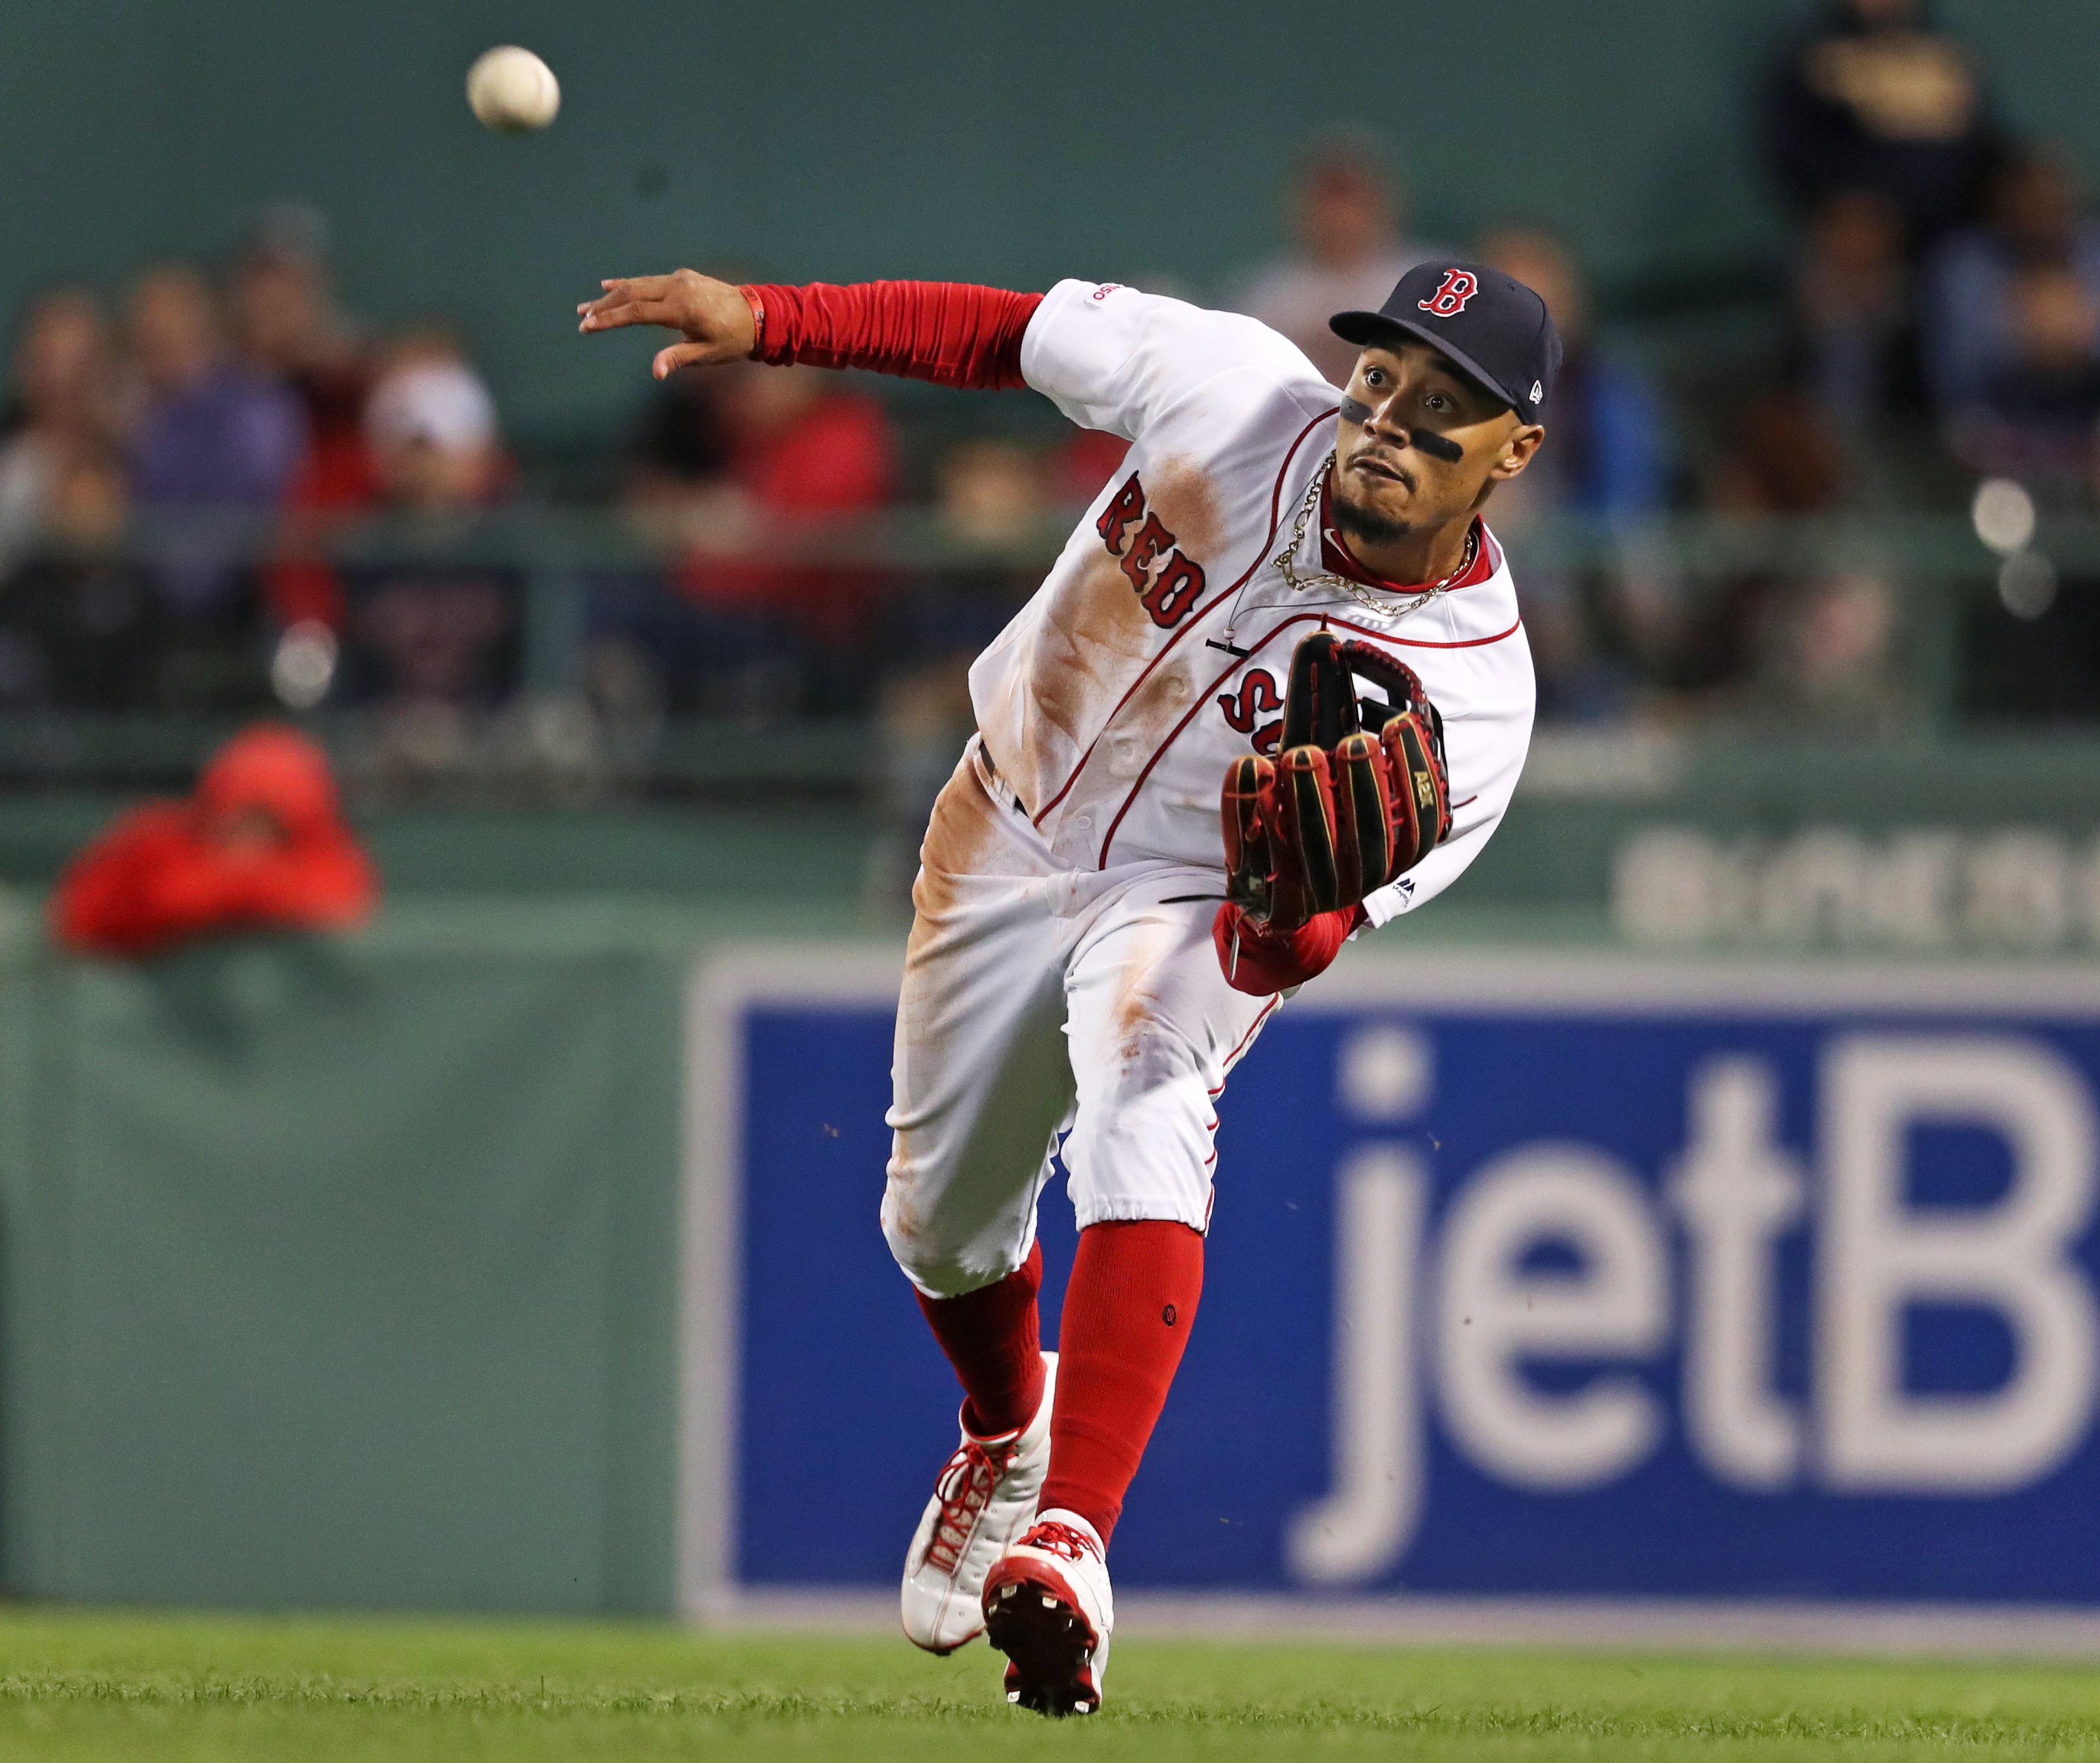 Red Sox outfielder Mookie Betts is the first half American League MVP